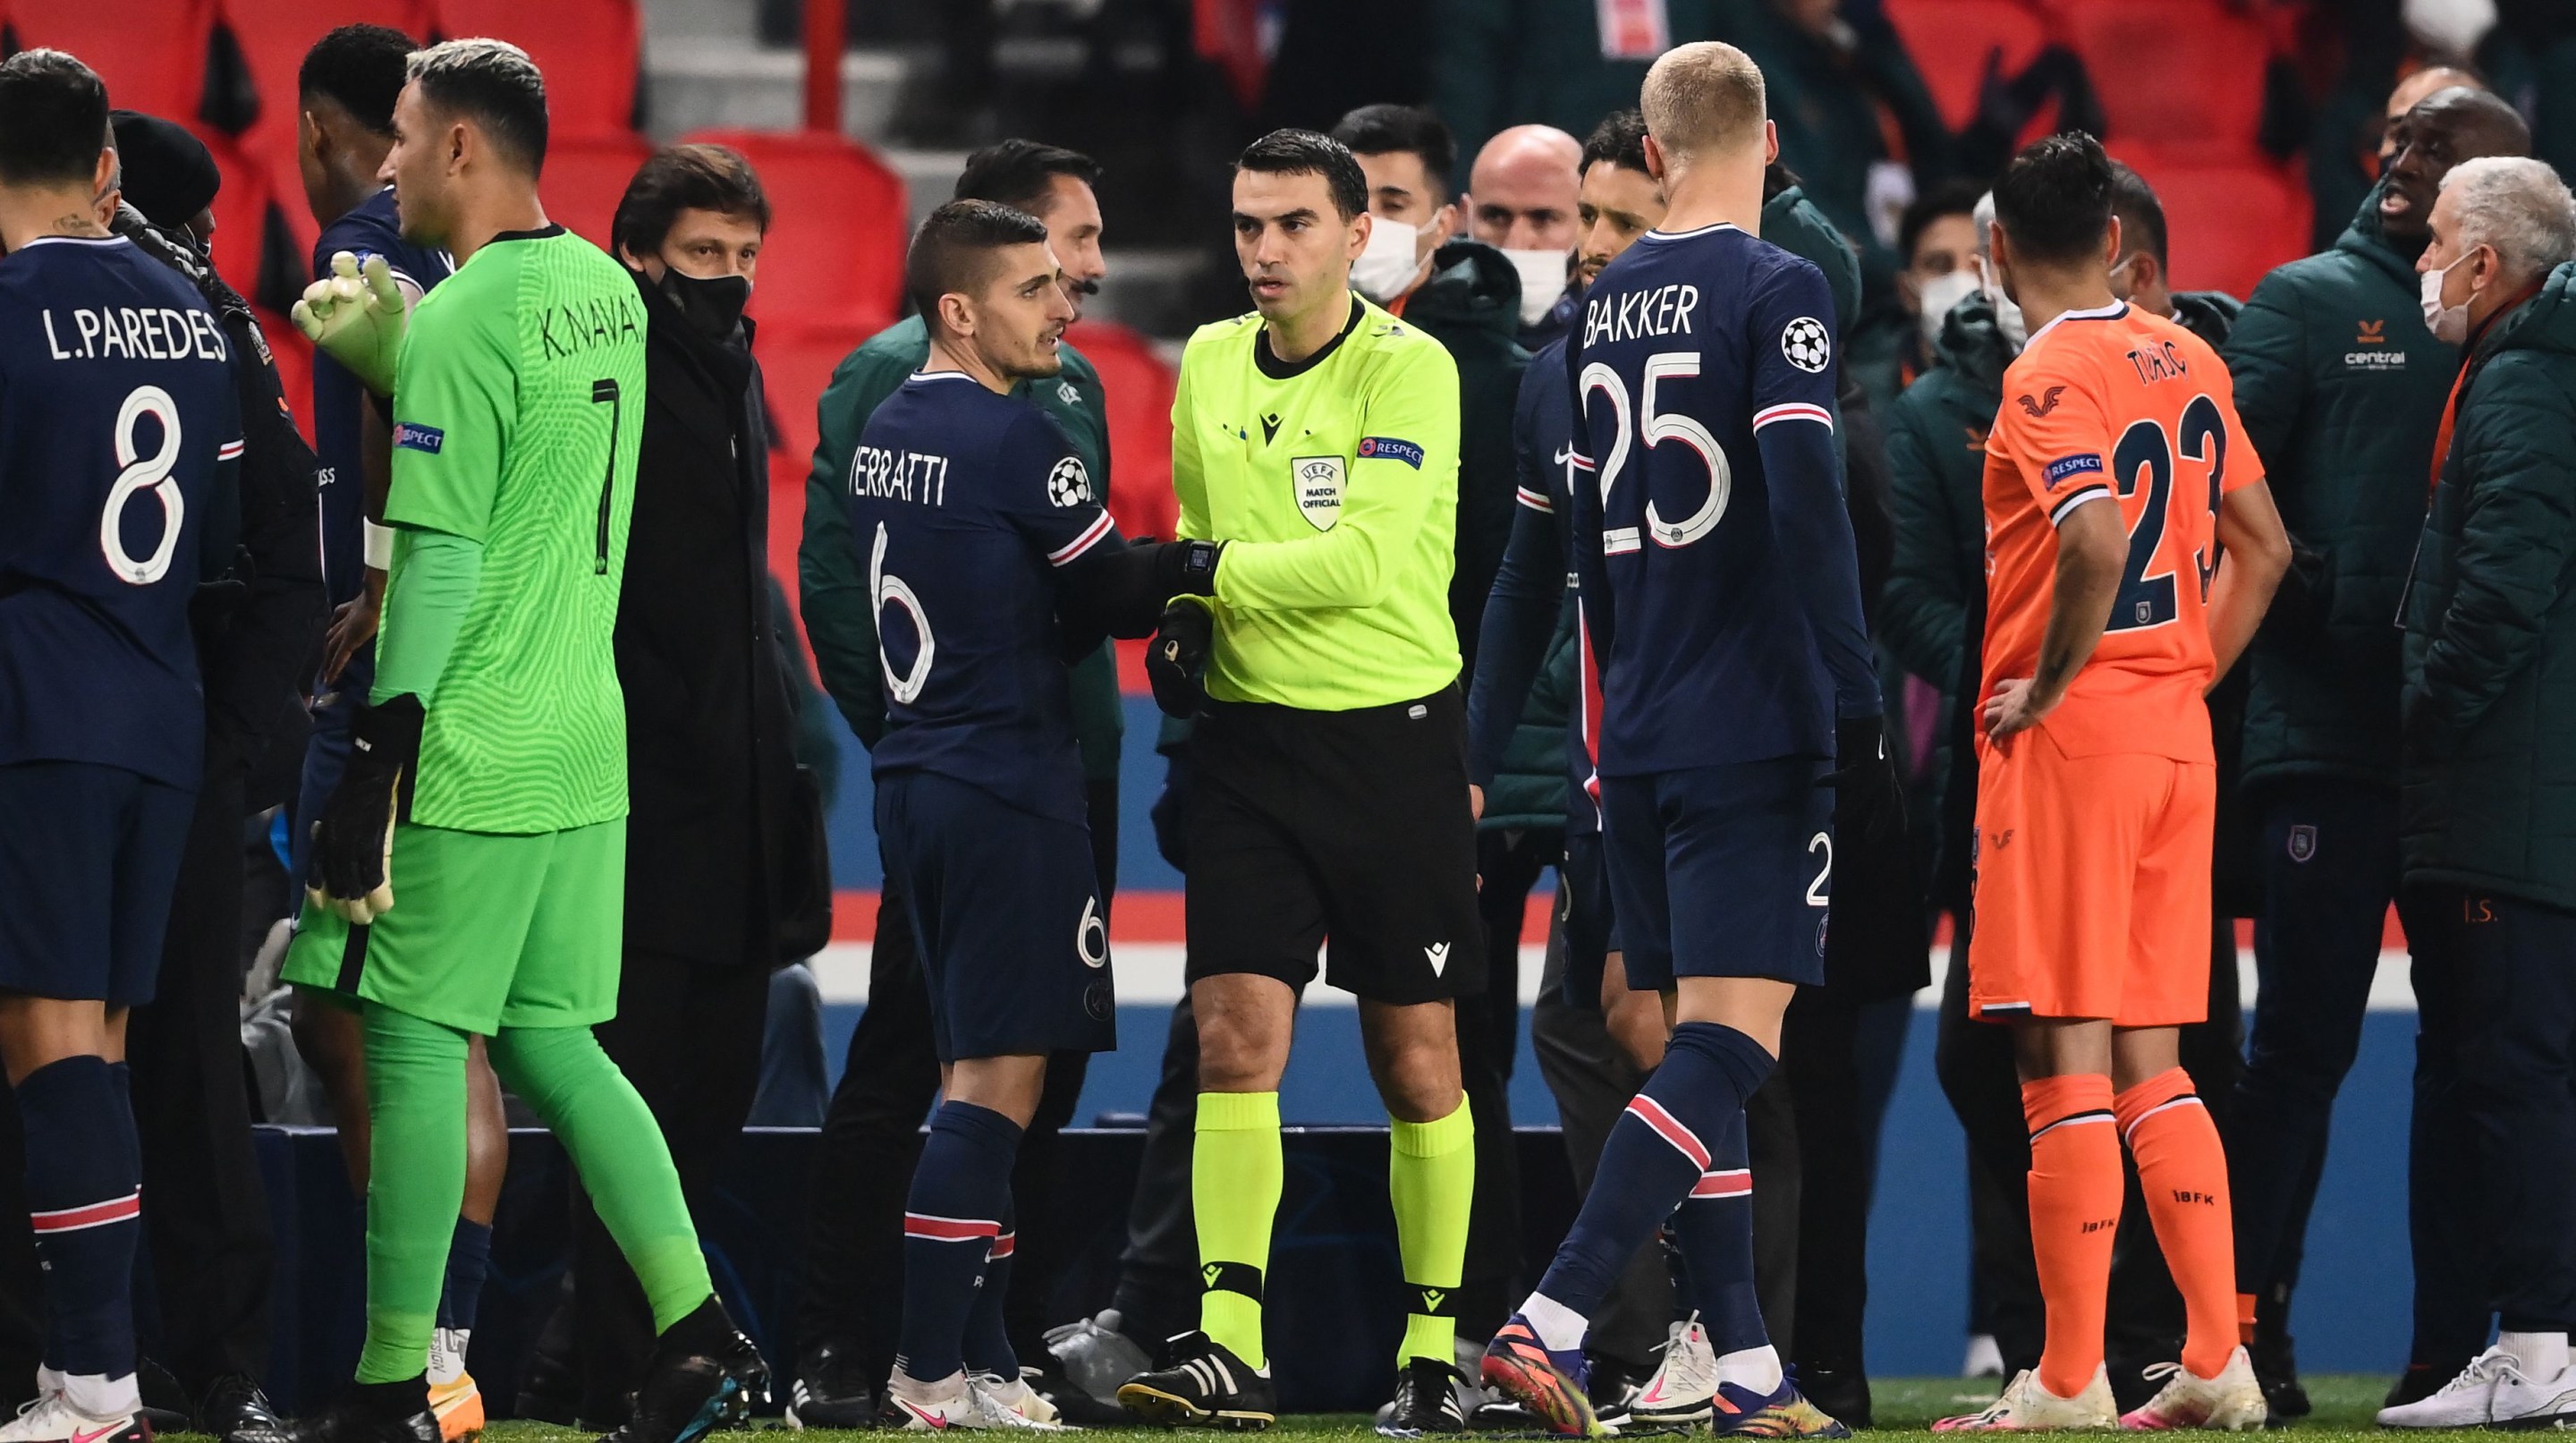 Romanian referee Ovidiu Hategan (in yellow) passes by Paris Saint-Germain's Italian midfielder Marco Verratti (CL) after the game was suspended amid allegations of racism by one of the match officials during the UEFA Champions League group H football match between Paris Saint-Germain (PSG) and Istanbul Basaksehir FK